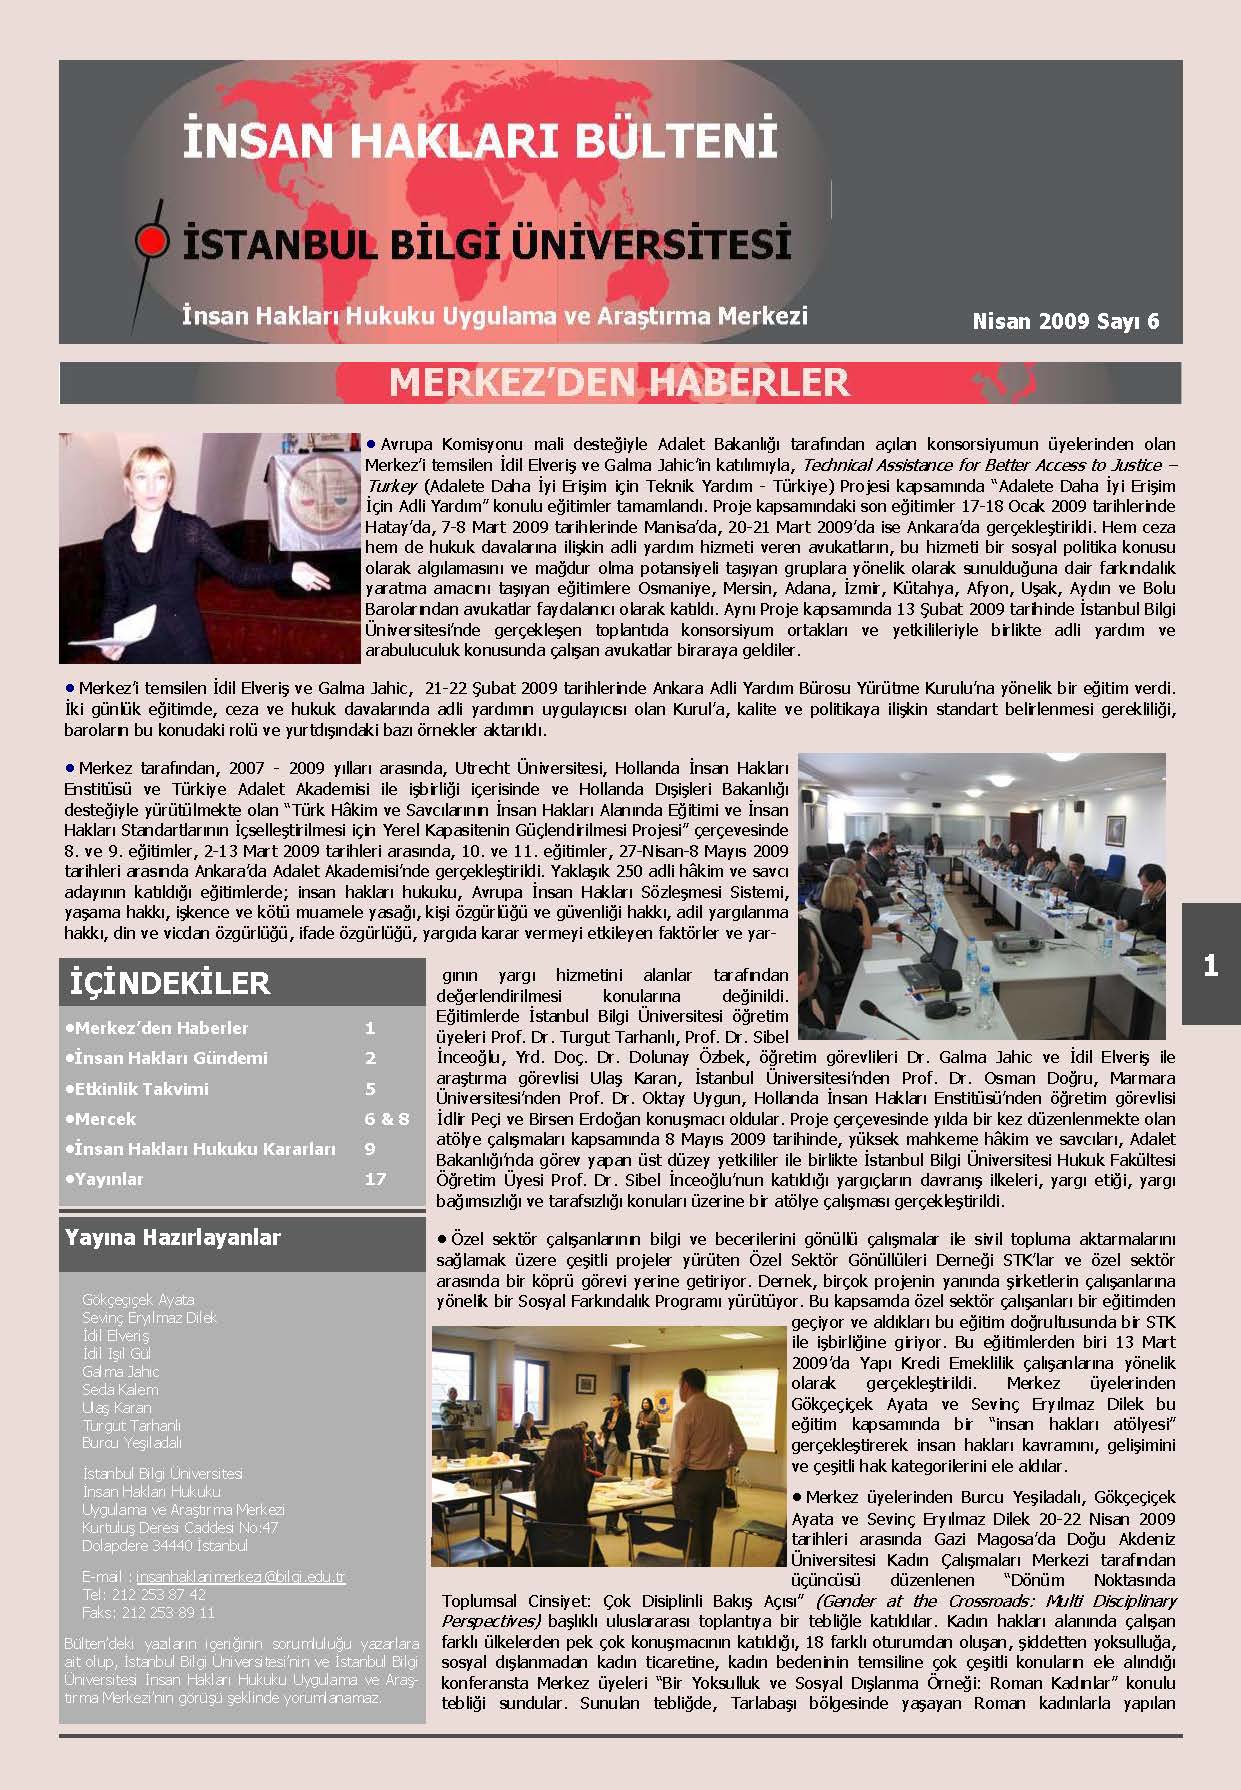 Human Rights Bulletin, April 2009, Issue 6